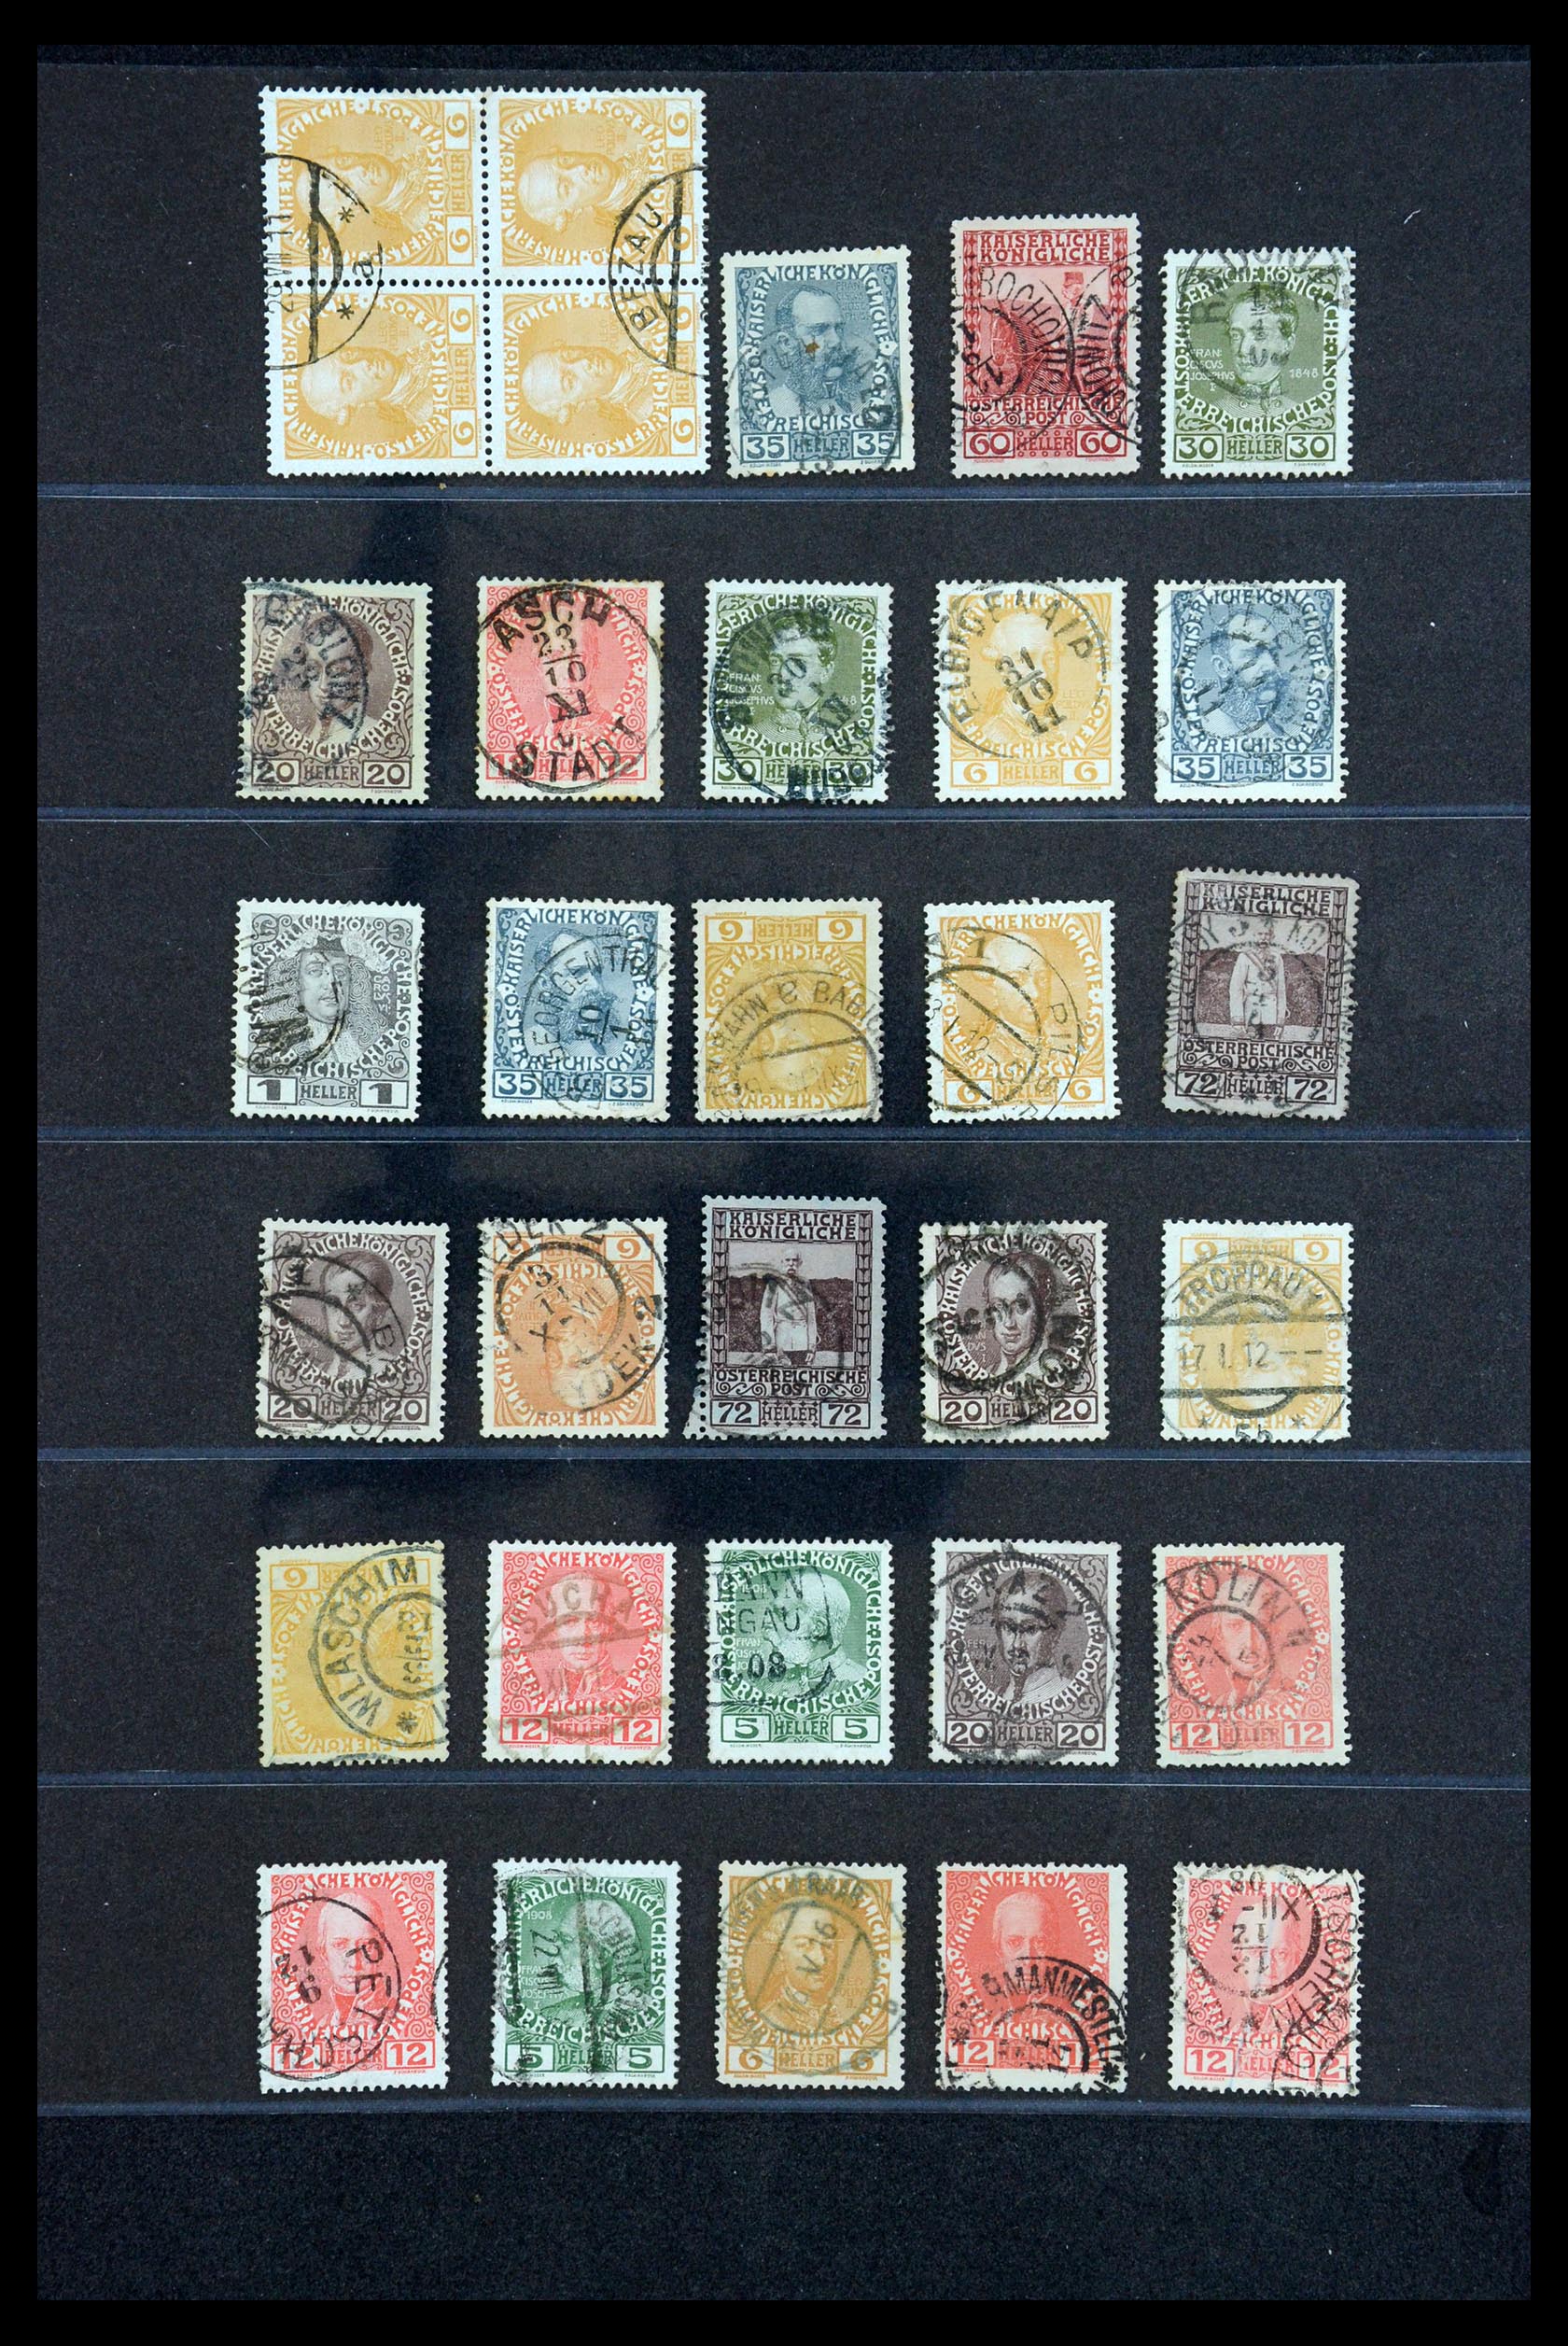 35833 005 - Stamp Collection 35833 Austria cancels 1908-1910.